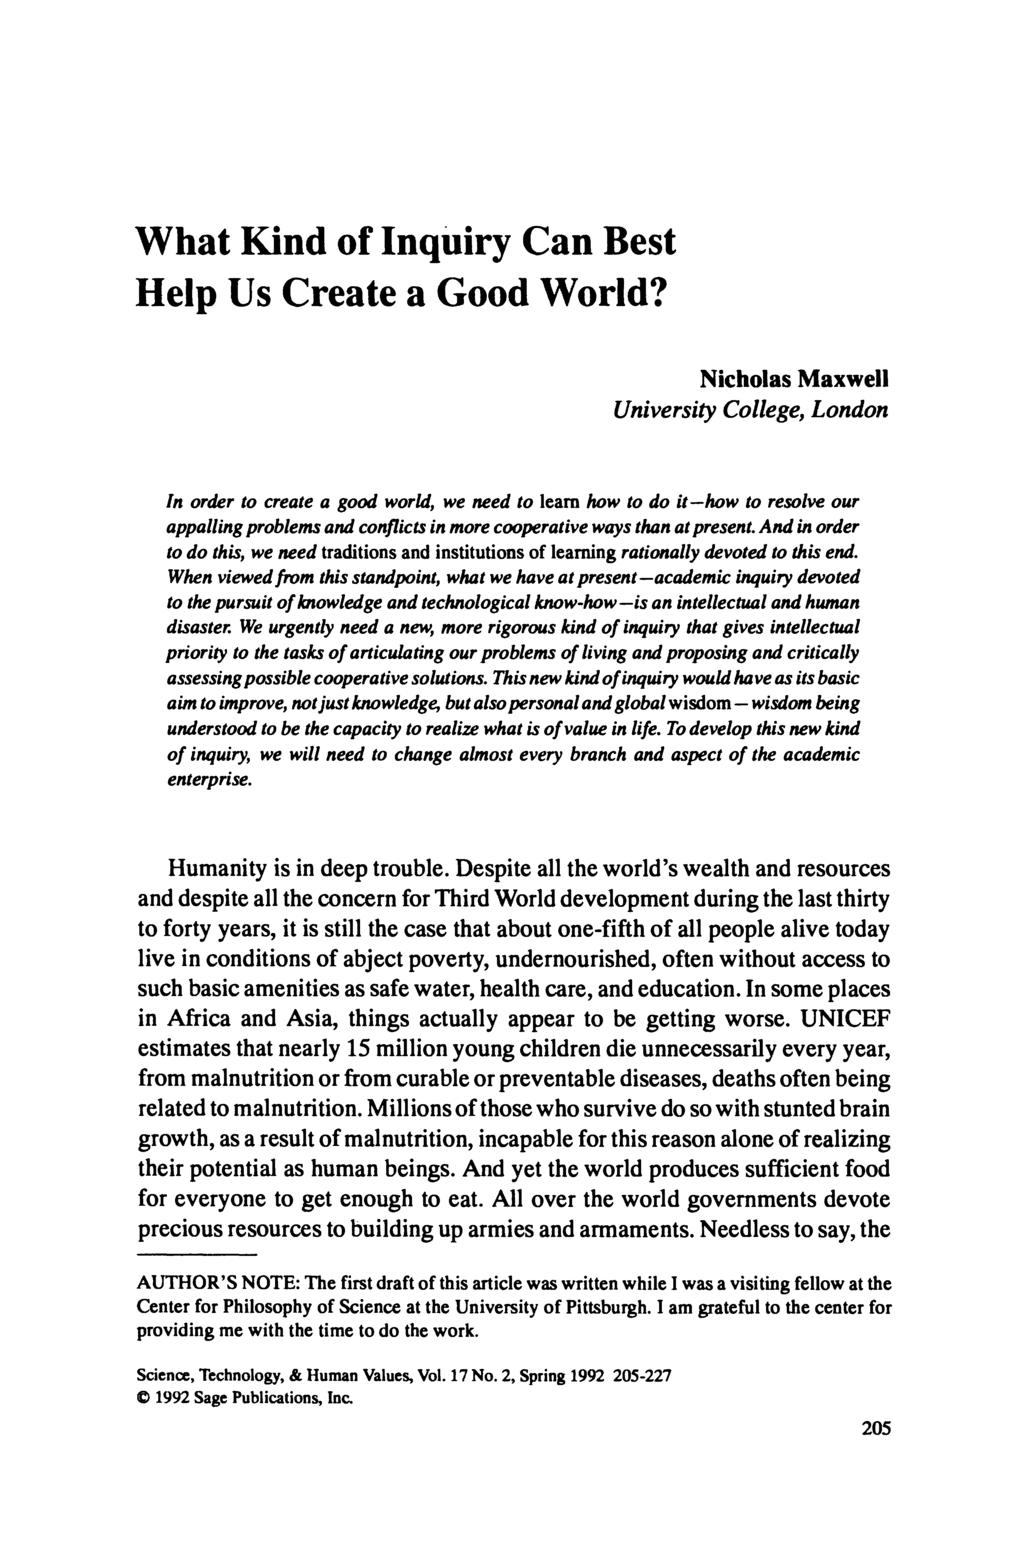 What Kind of Inquiry Can Best Help Us Create a Good World?